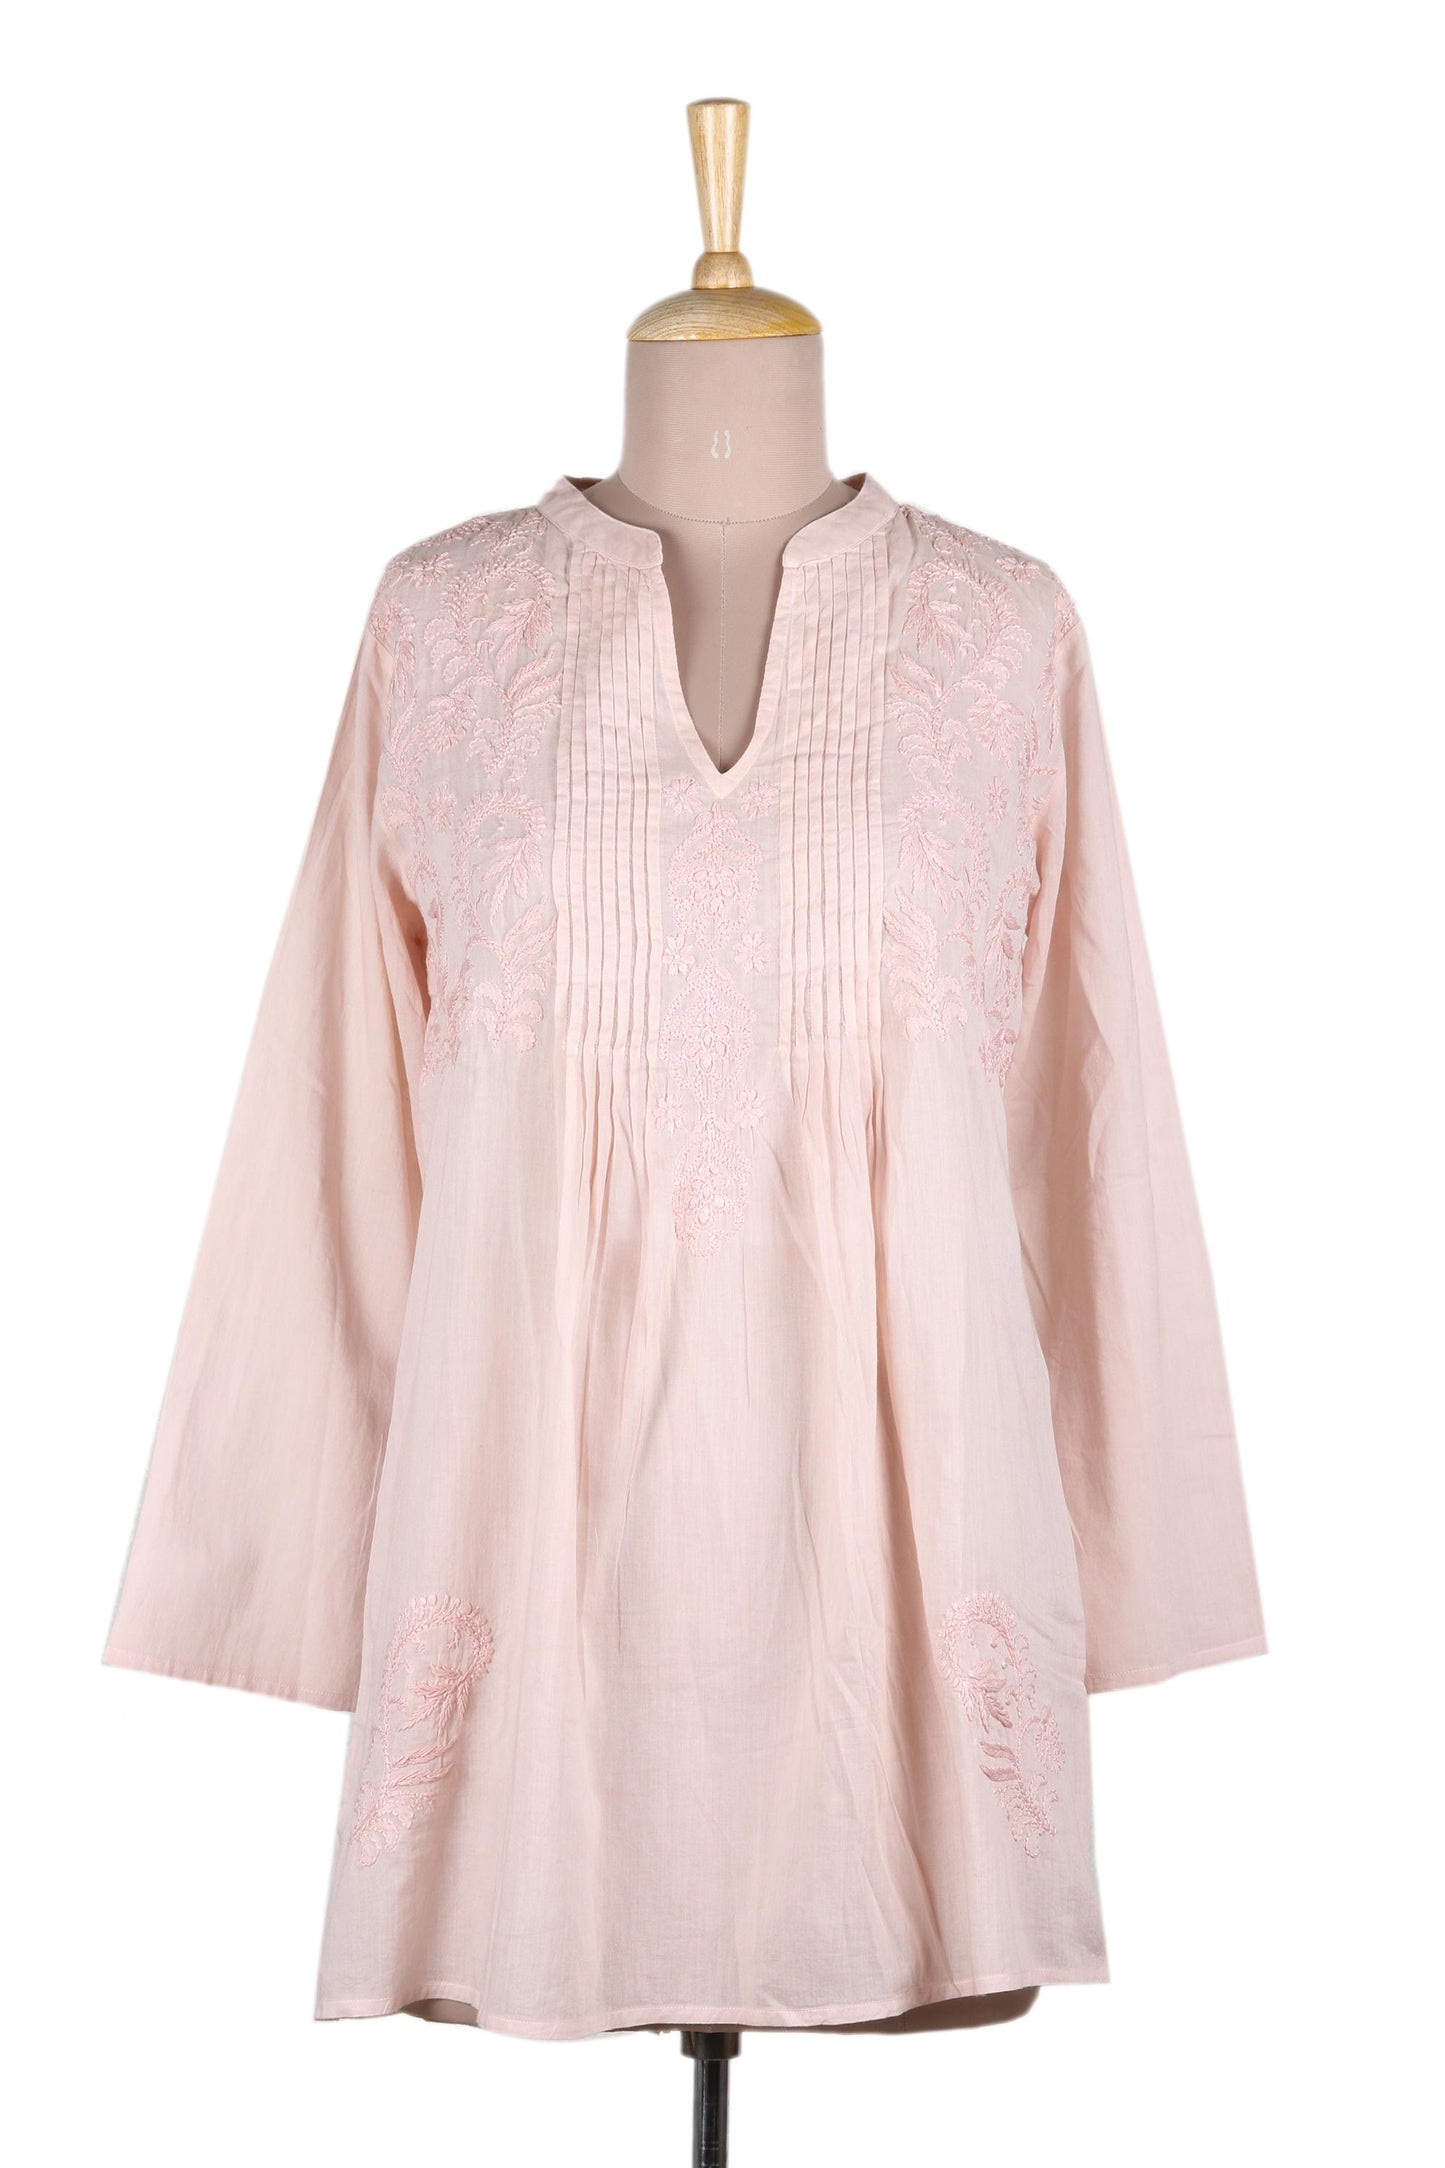 Spring Dance Hand Embroidered Pink Cotton Tunic from India